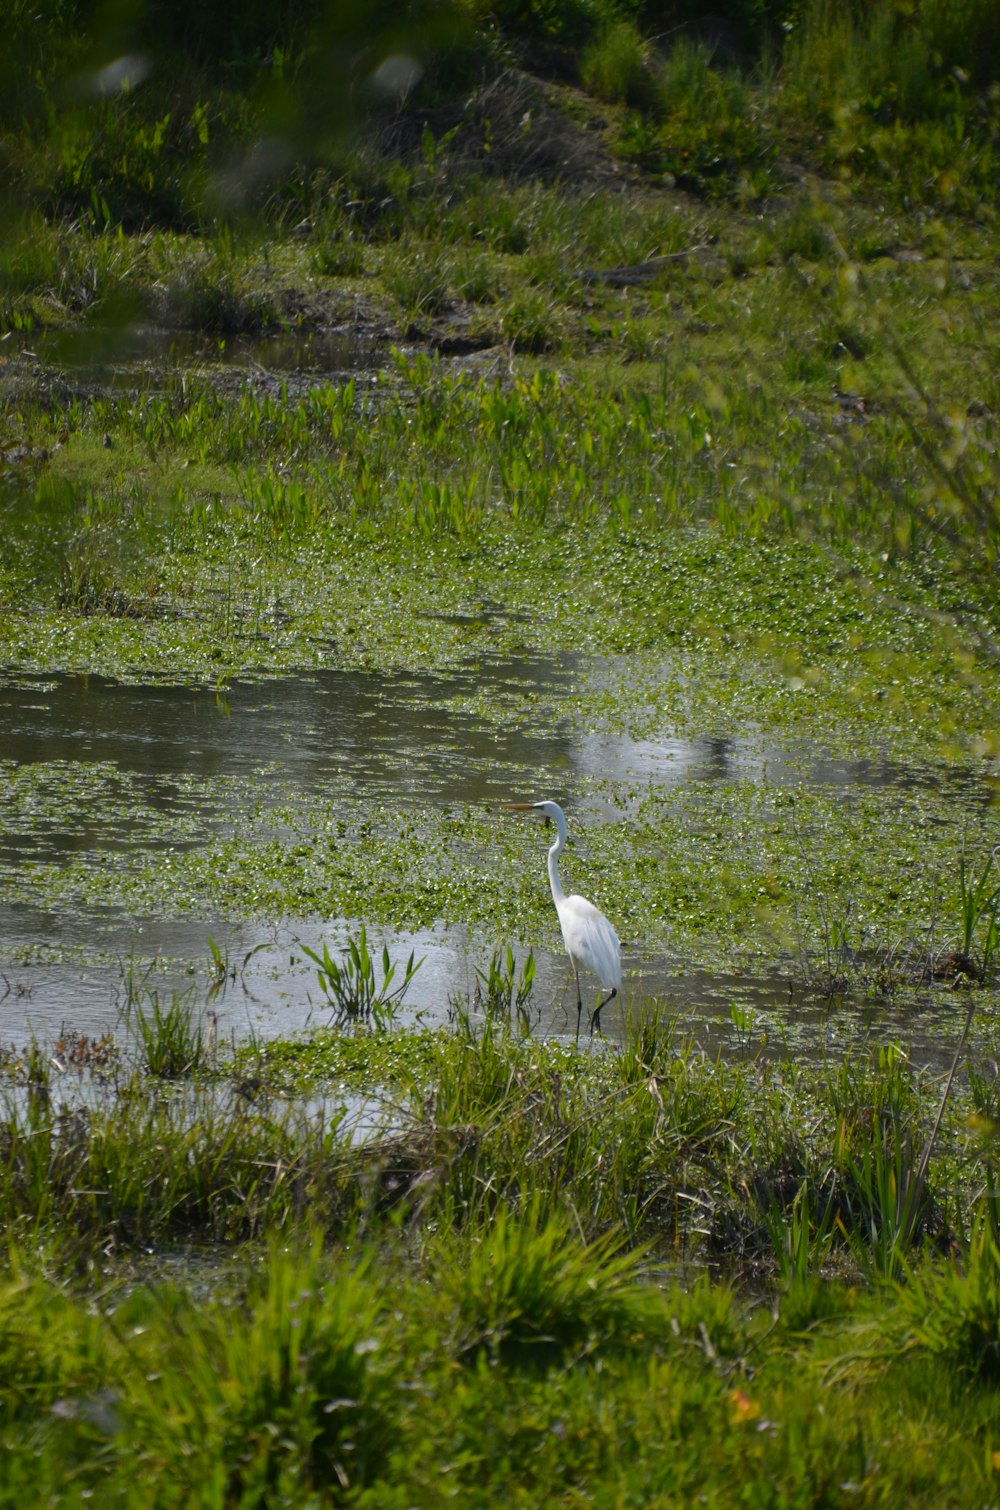 a white bird standing in a swampy area